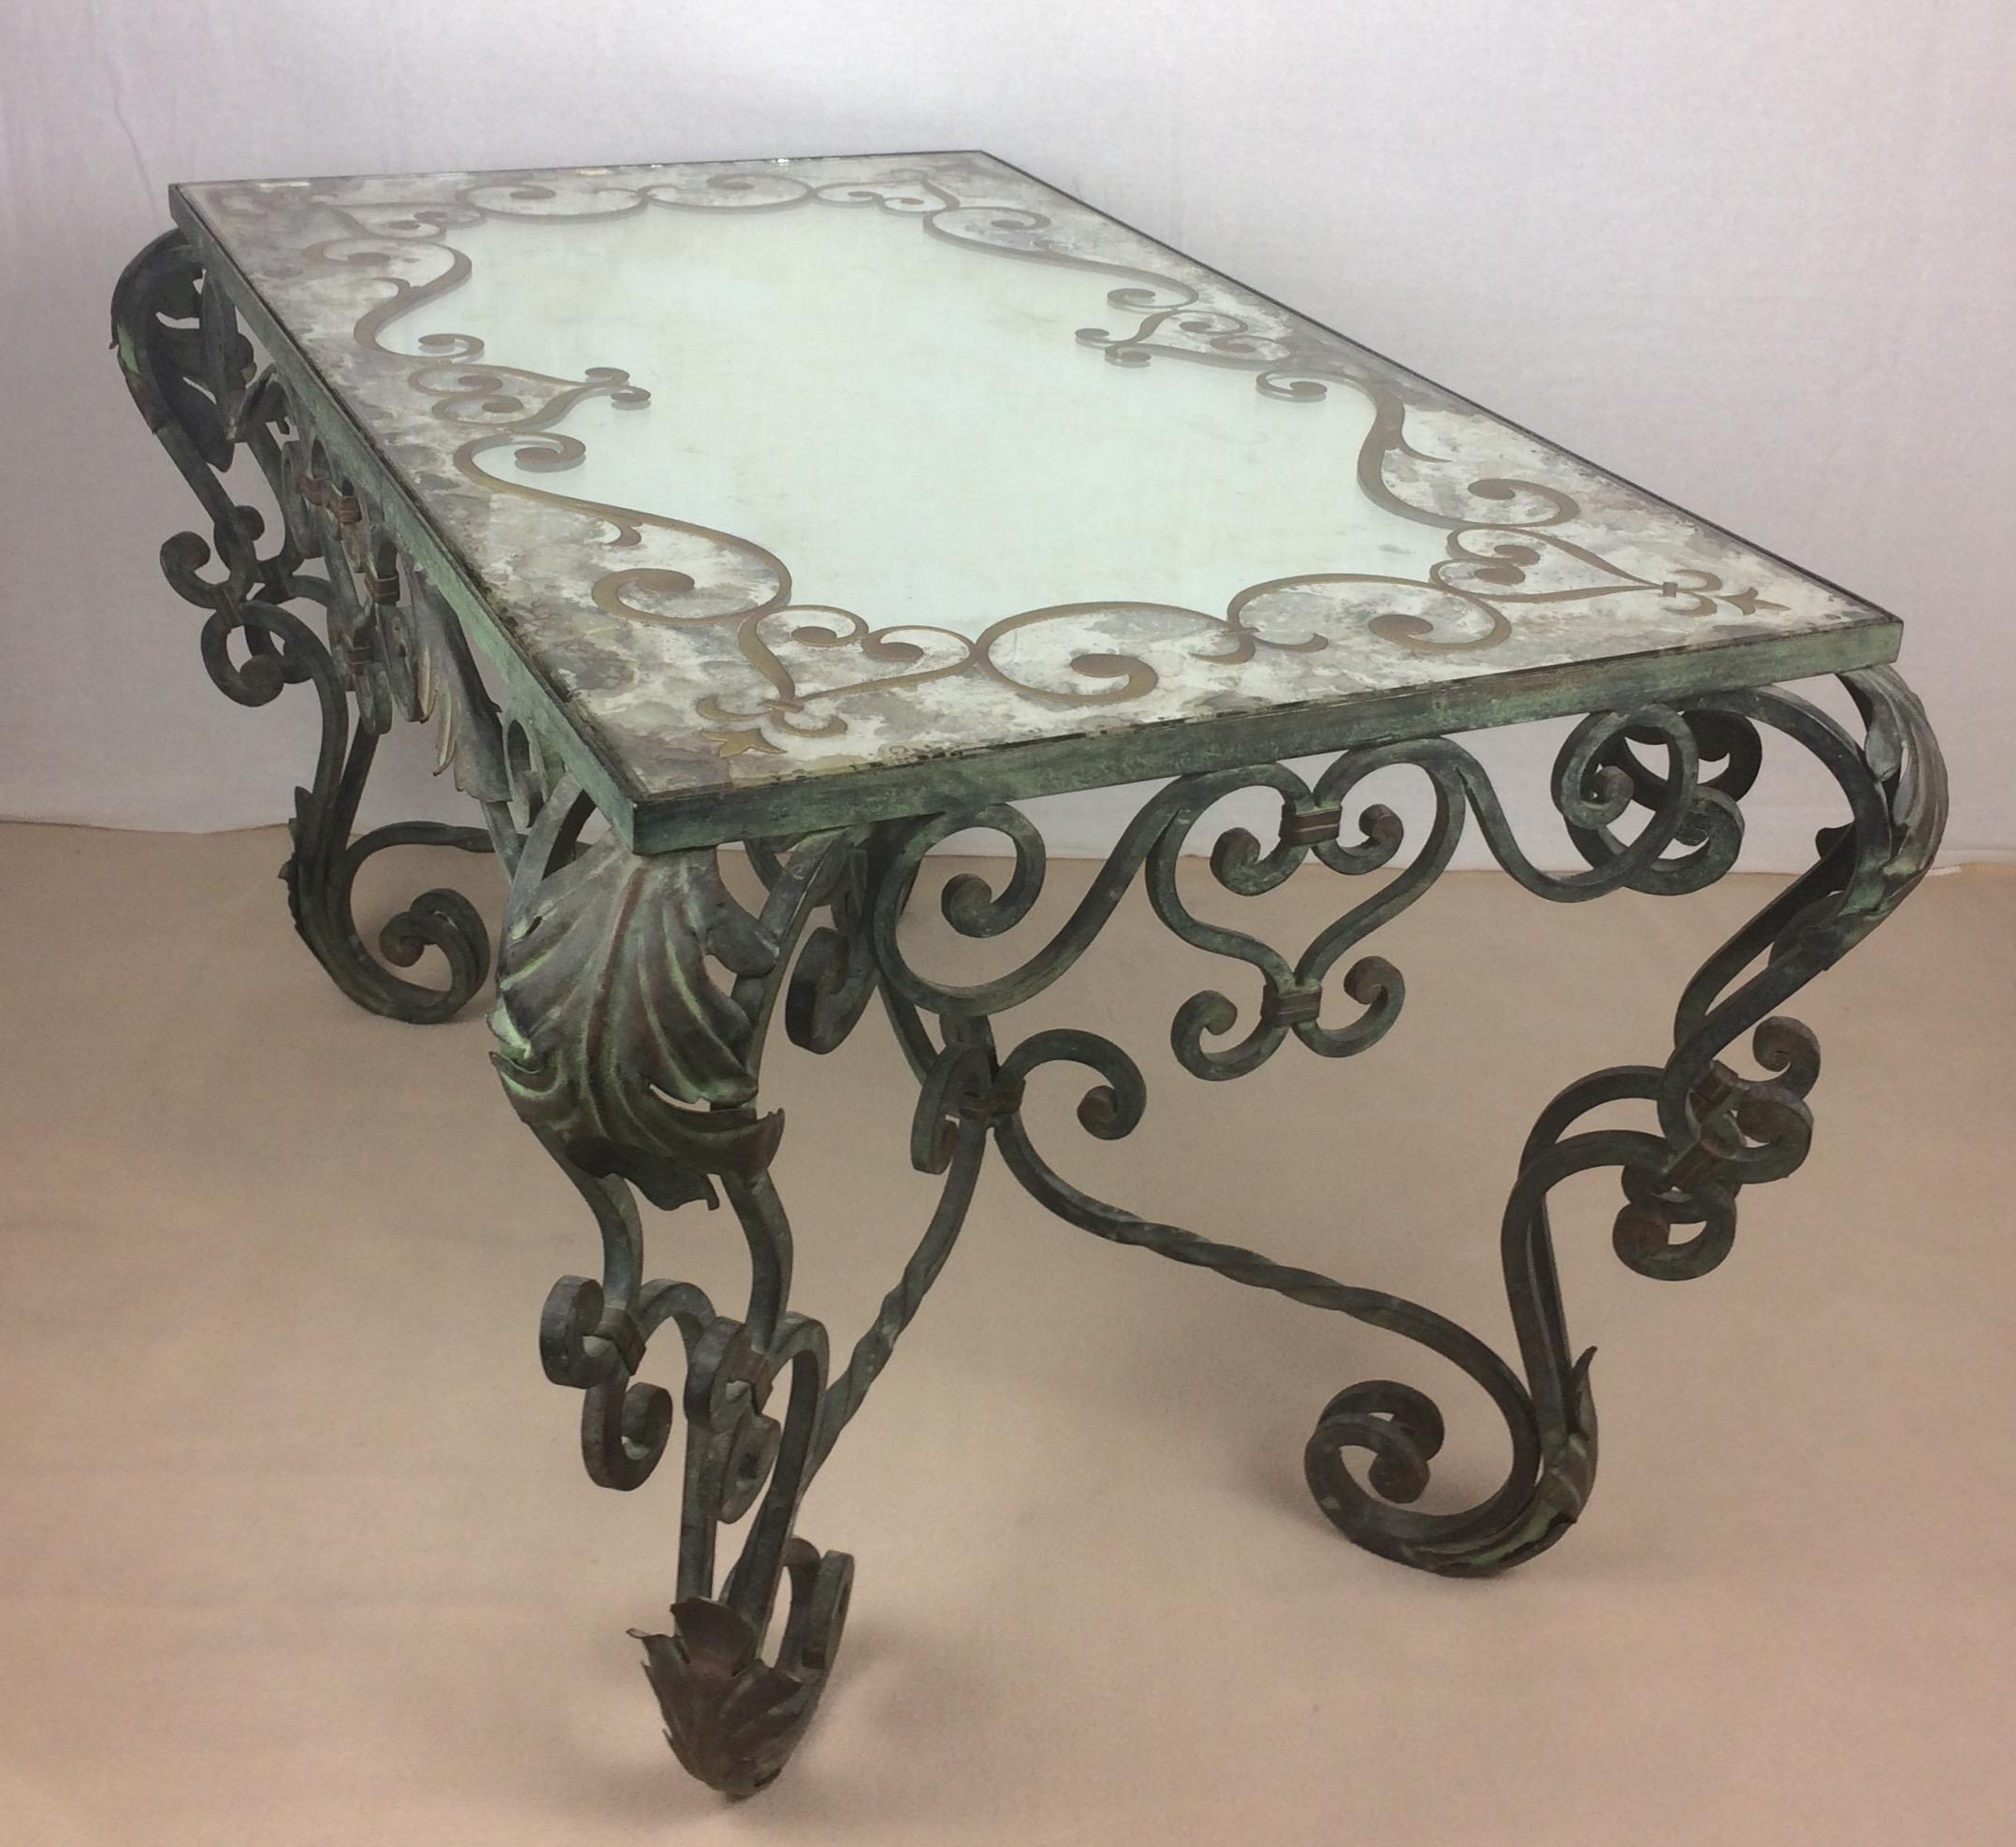 Wrought iron coffee, side or end table with églomisé mirrored top attributed to Gilbert Pollierat, France, 1940. 

This table has an elegant design with pure lines and accents. It is very heavy and finely executed with scrolled details and